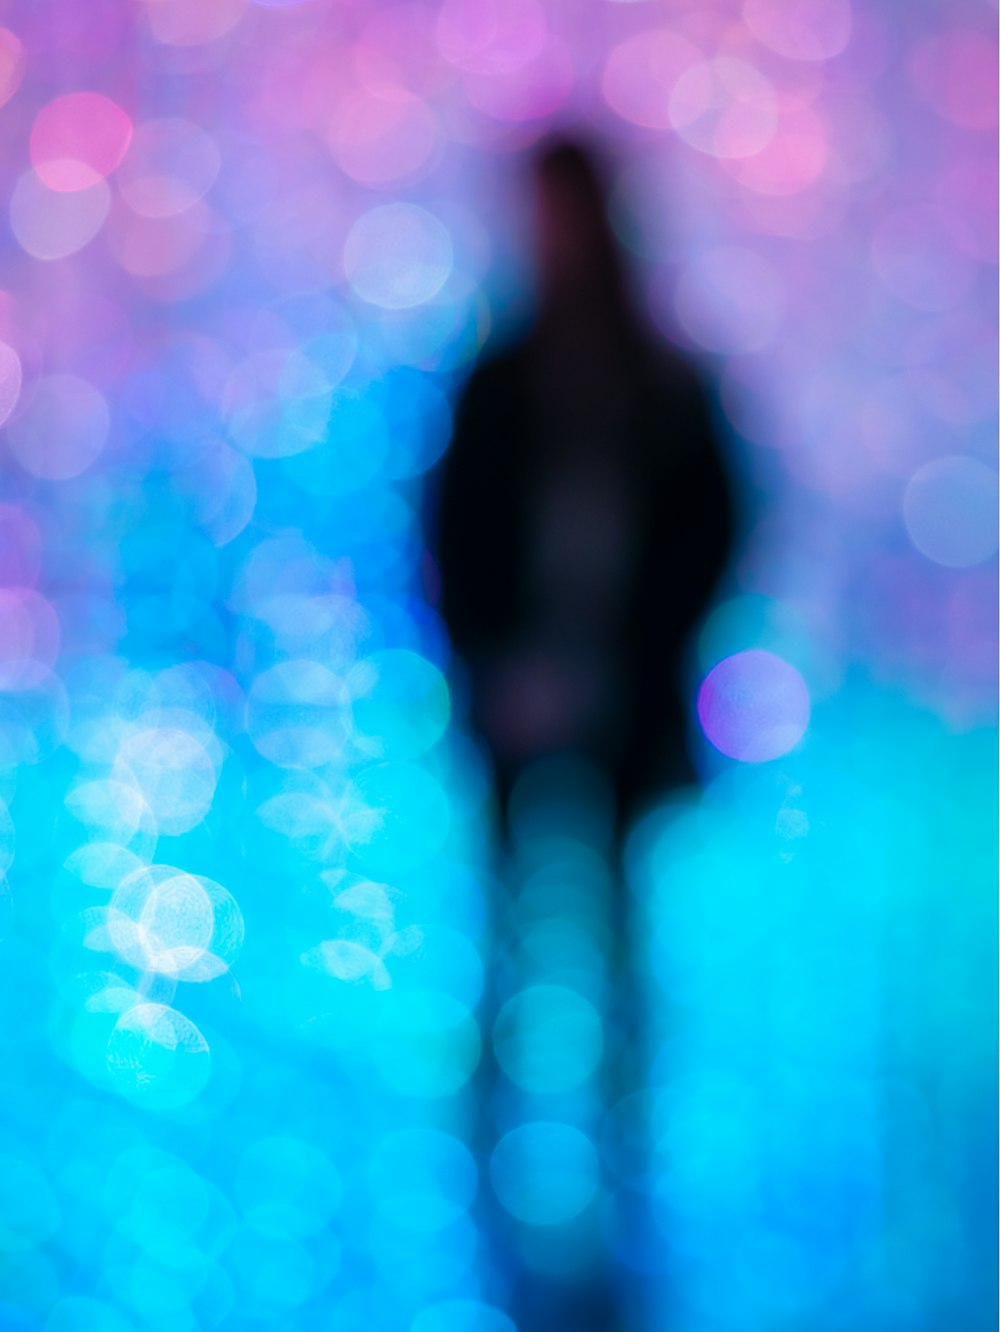 a blurry image of a person standing in front of a blue and pink background